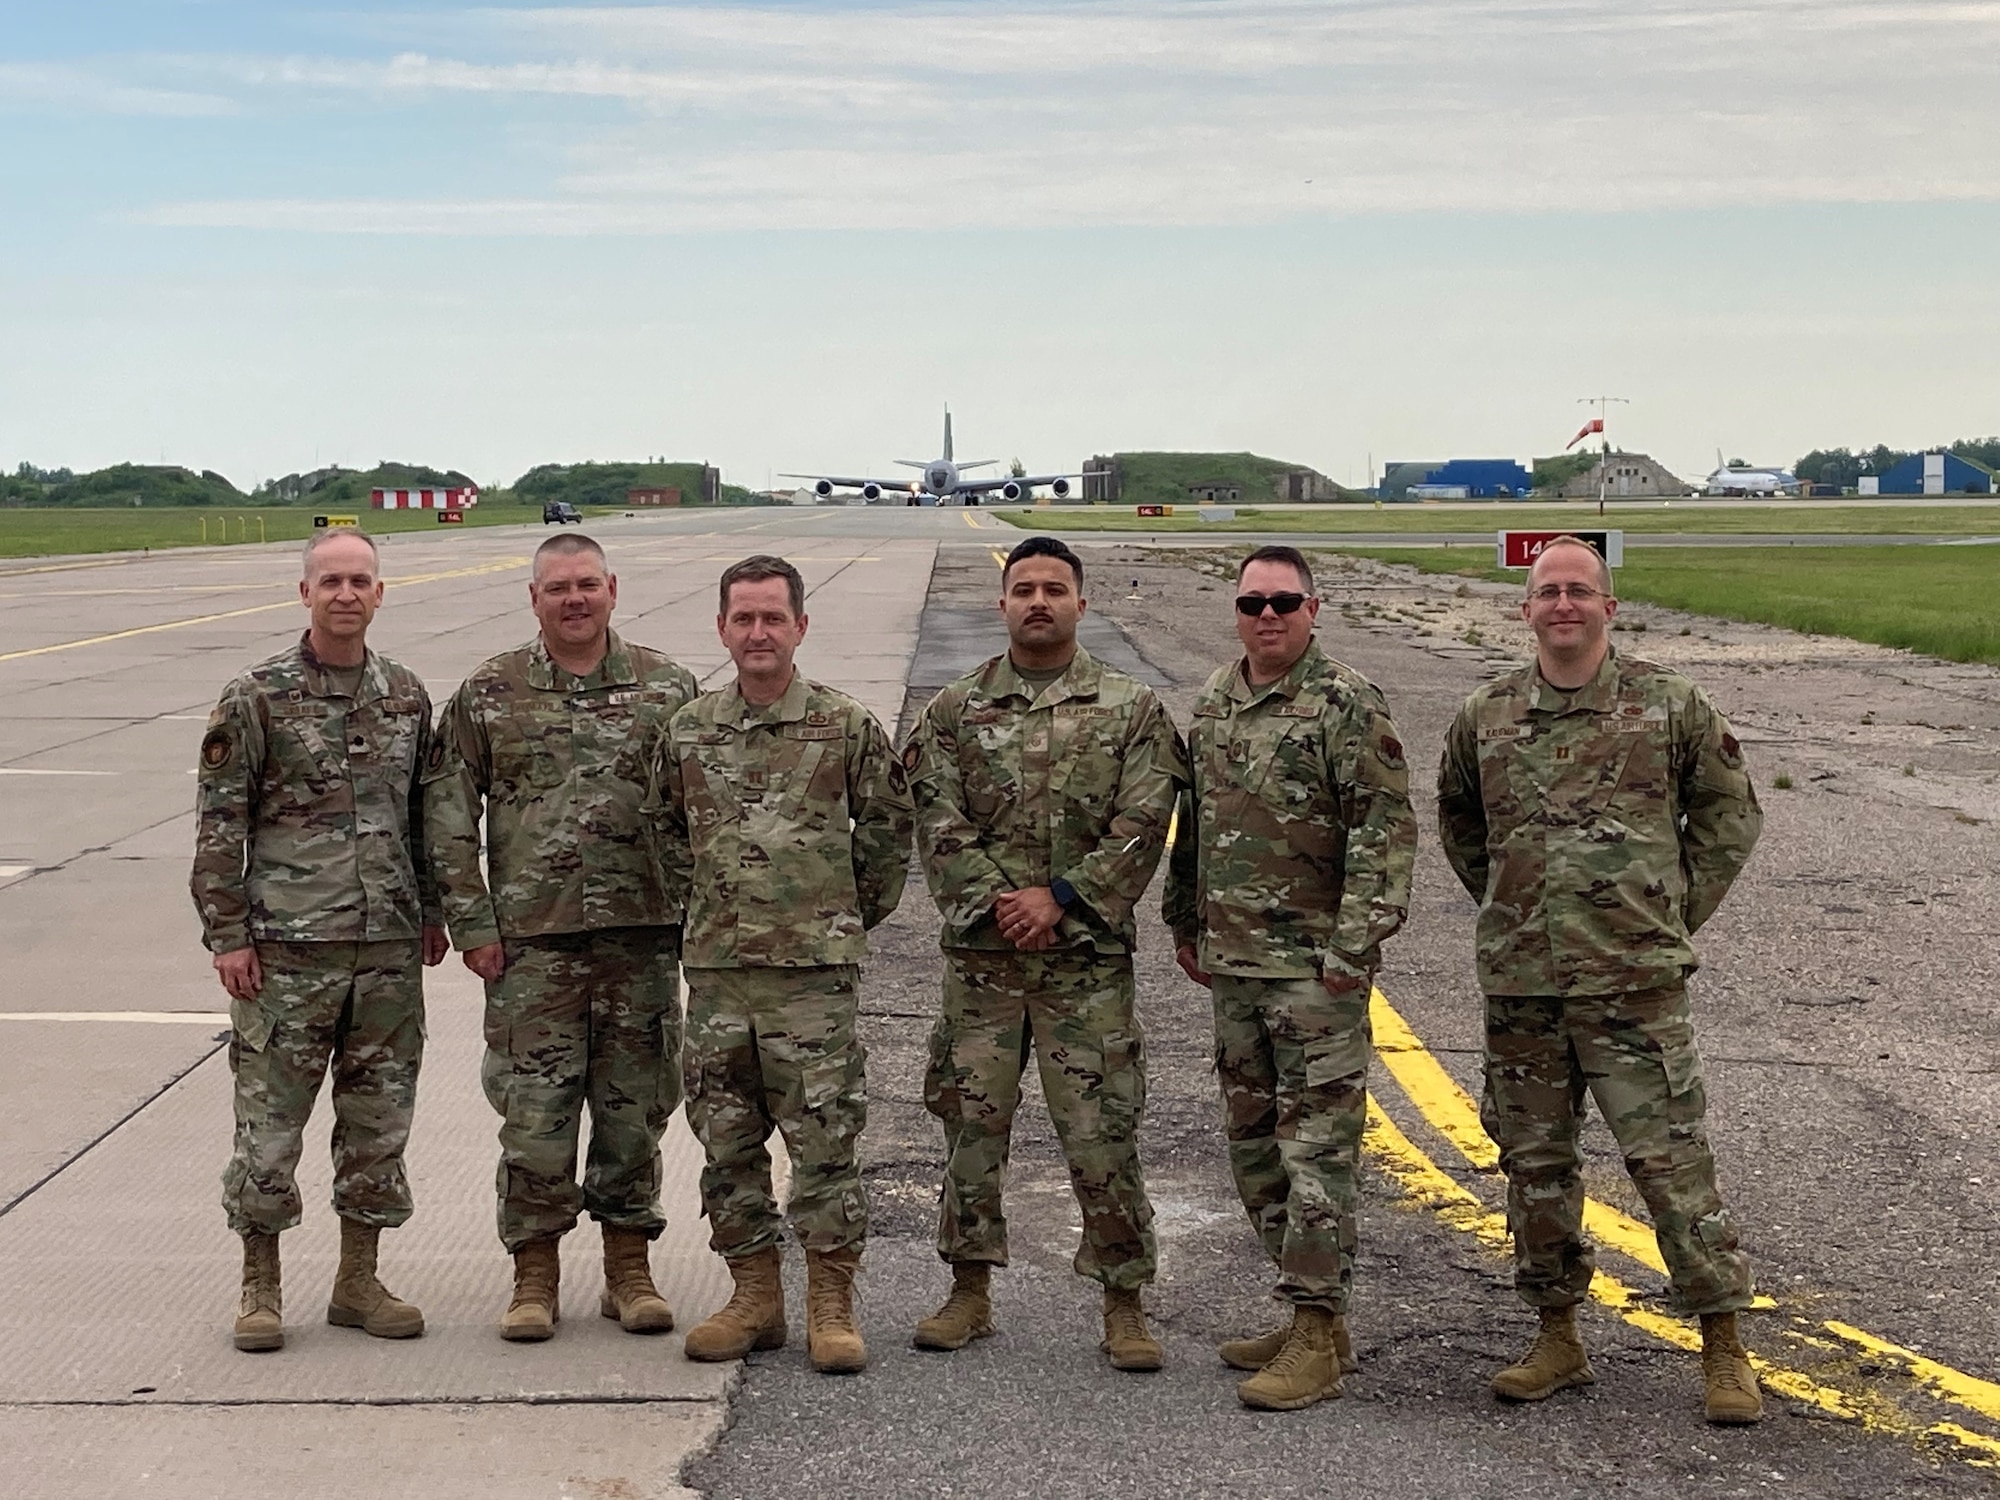 From left, Pennsylvania Air National Guard Lt. Col. Frank Shoaf, Chief Master Sgt. Jason Everetts, Capt. Matthew Reed, Master Sgt. Frankie Perez, Chief Master Sgt. Andrew Mowry and Capt. Benjamin Kaufman with the 171st Air Refueling Wing’s 258th Air Traffic Control Squadron at Siauliai Air Base, Lithuania, during the Defender Europe 22 exercise, June 2022. The Pennsylvania Guard and Lithuania are partners under the Department of Defense National Guard Bureau State Partnership Program.